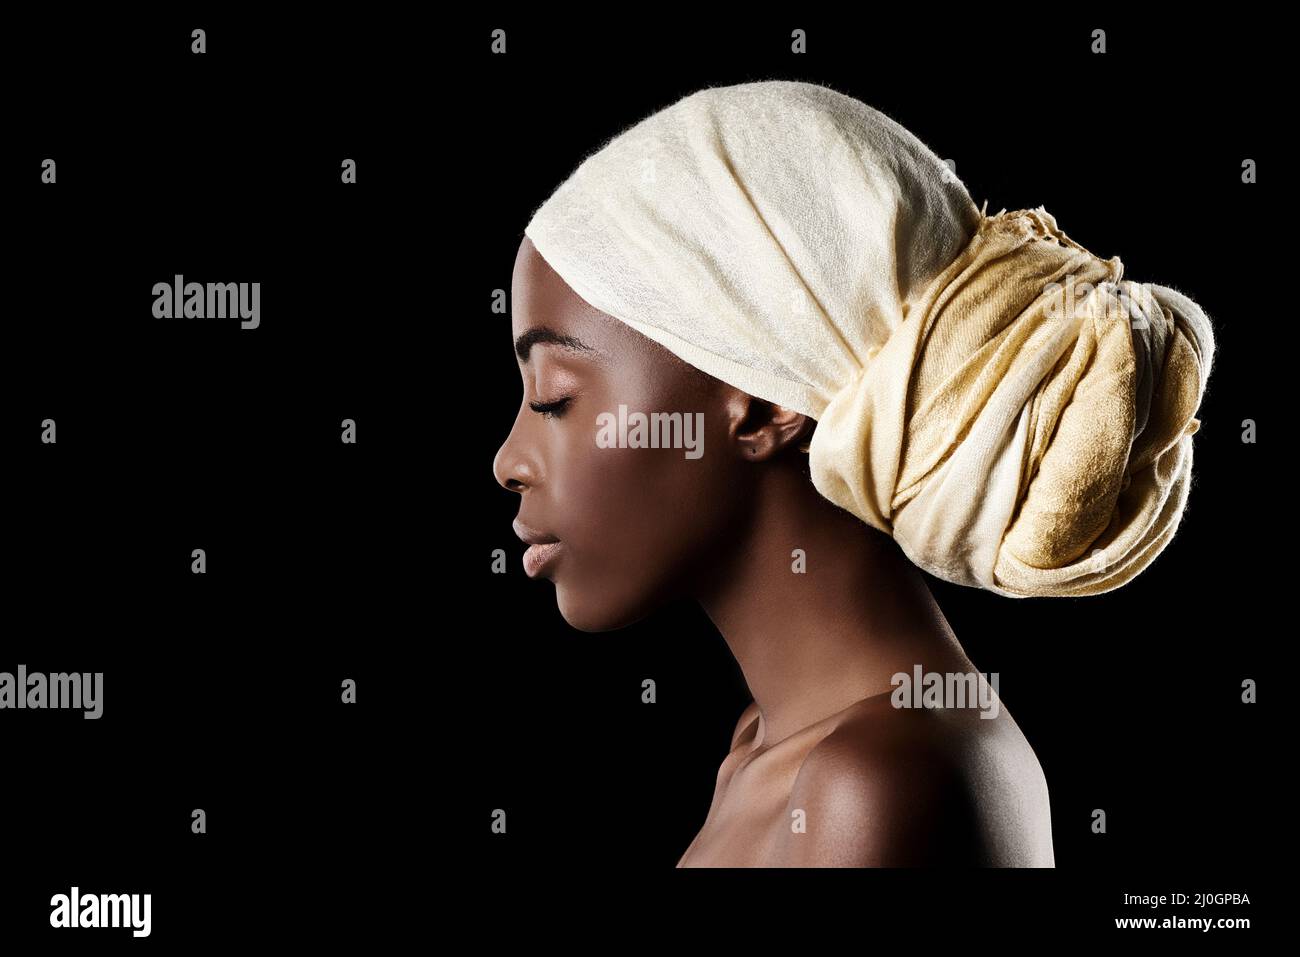 The profile of beauty. Studio shot of a beautiful woman wearing a headscarf against a black background. Stock Photo